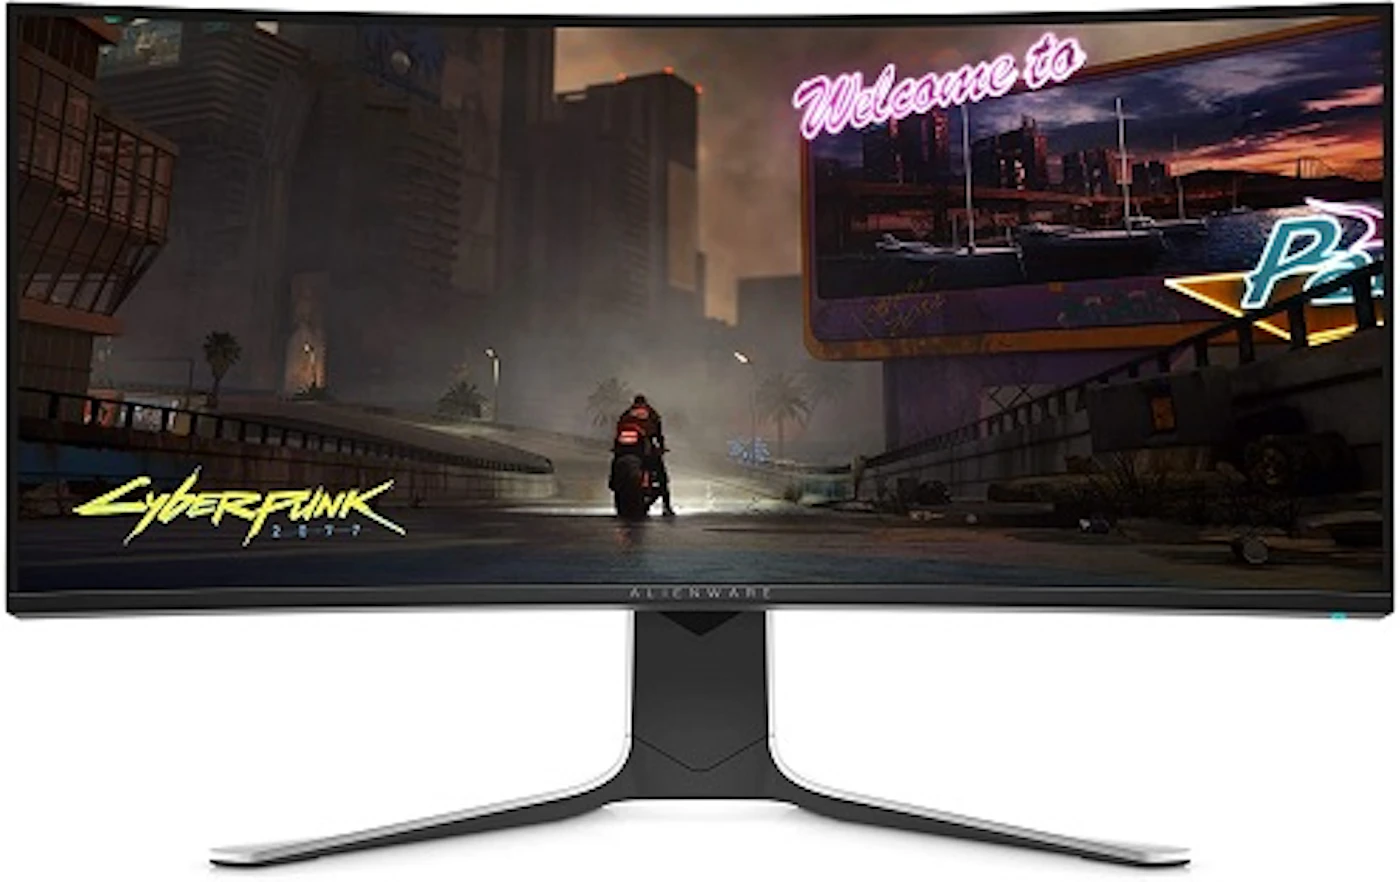 Alienware 34 3440 x 1440 UltraWide Curved Gaming Monitor AW3420DW - US